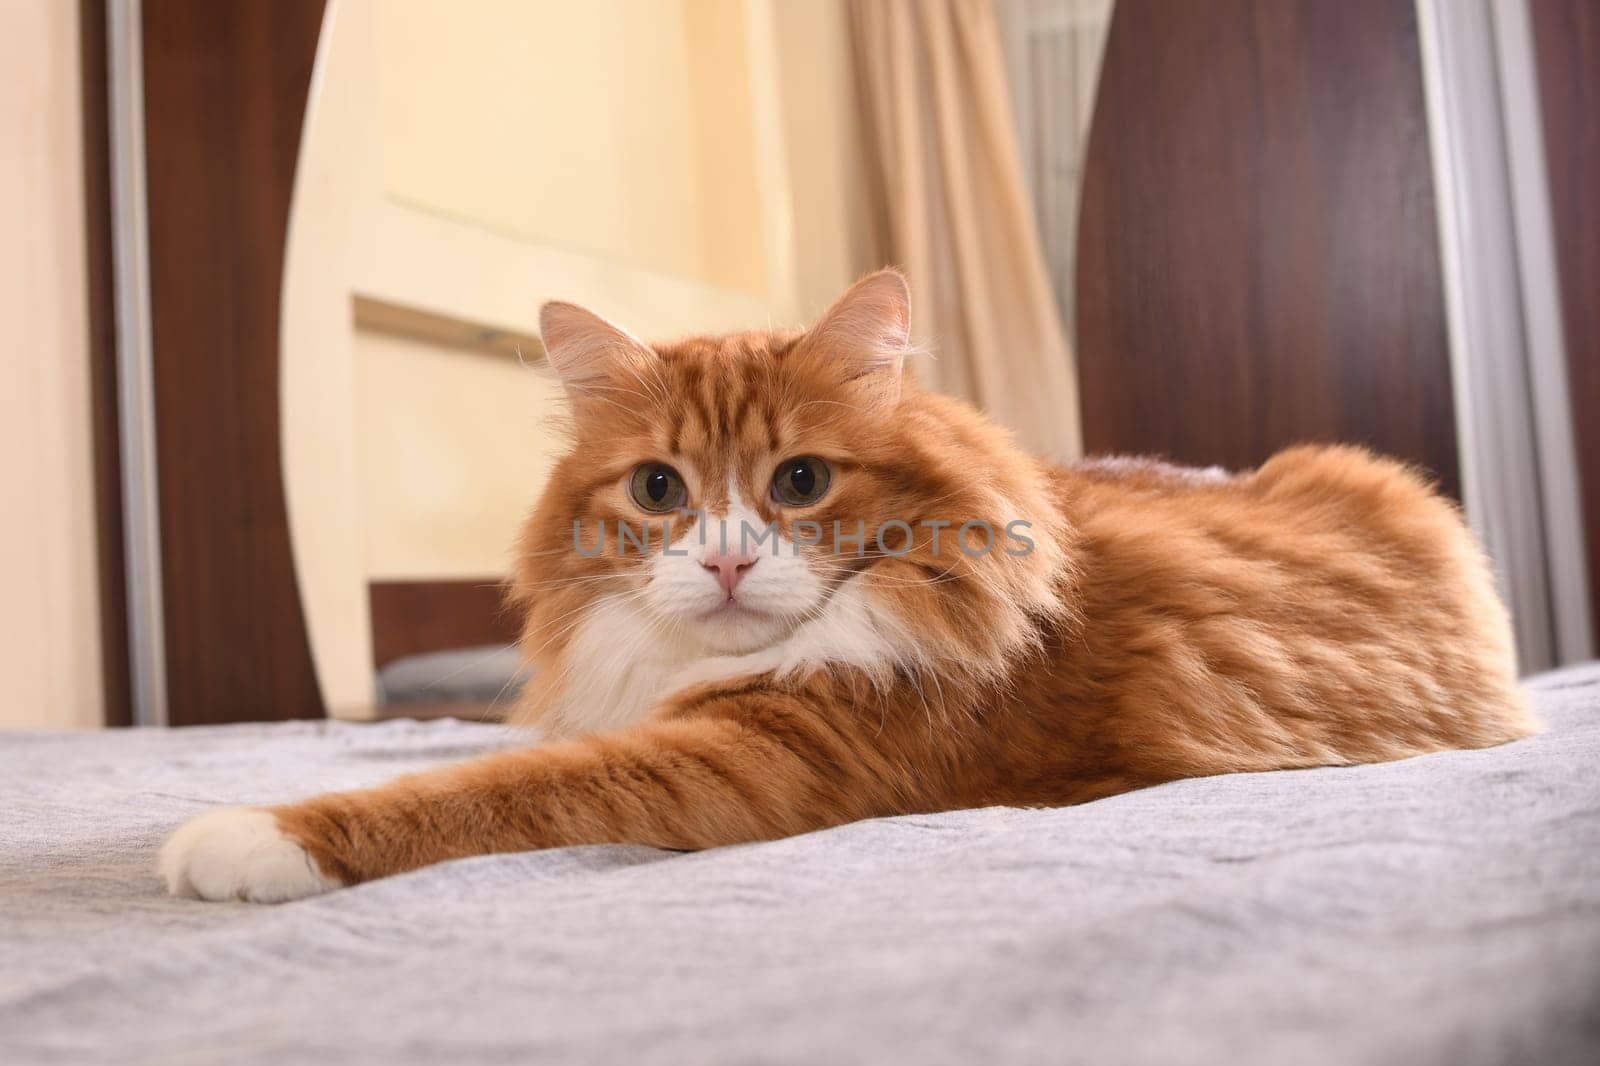   The ginger cat is resting, lounging on the bed. Close-up.